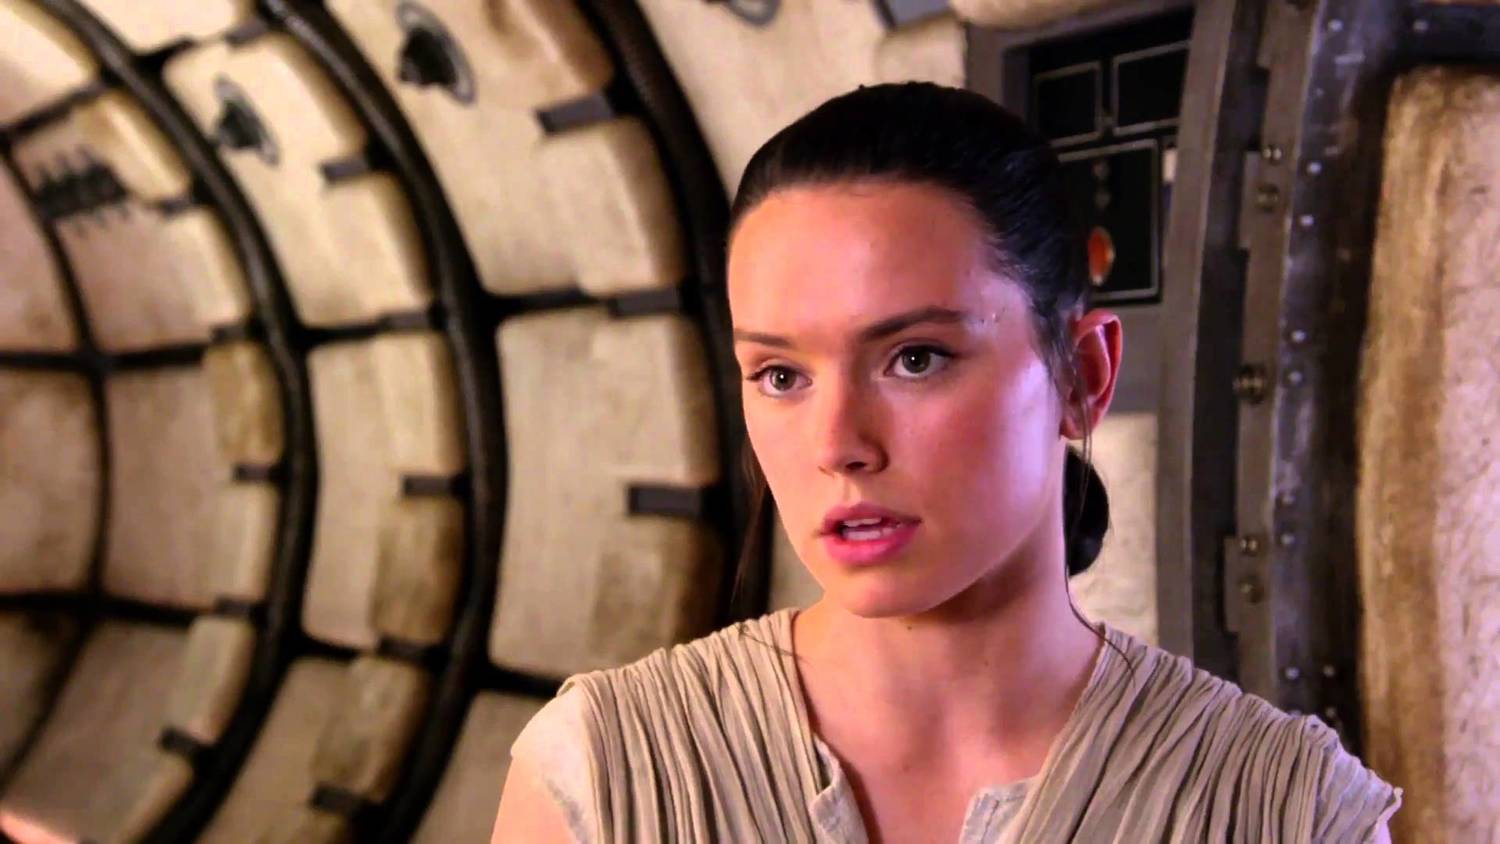 Daisy Ridley Shares Surprising Opinion About Rey (Spoilers...Maybe) - GeekT...